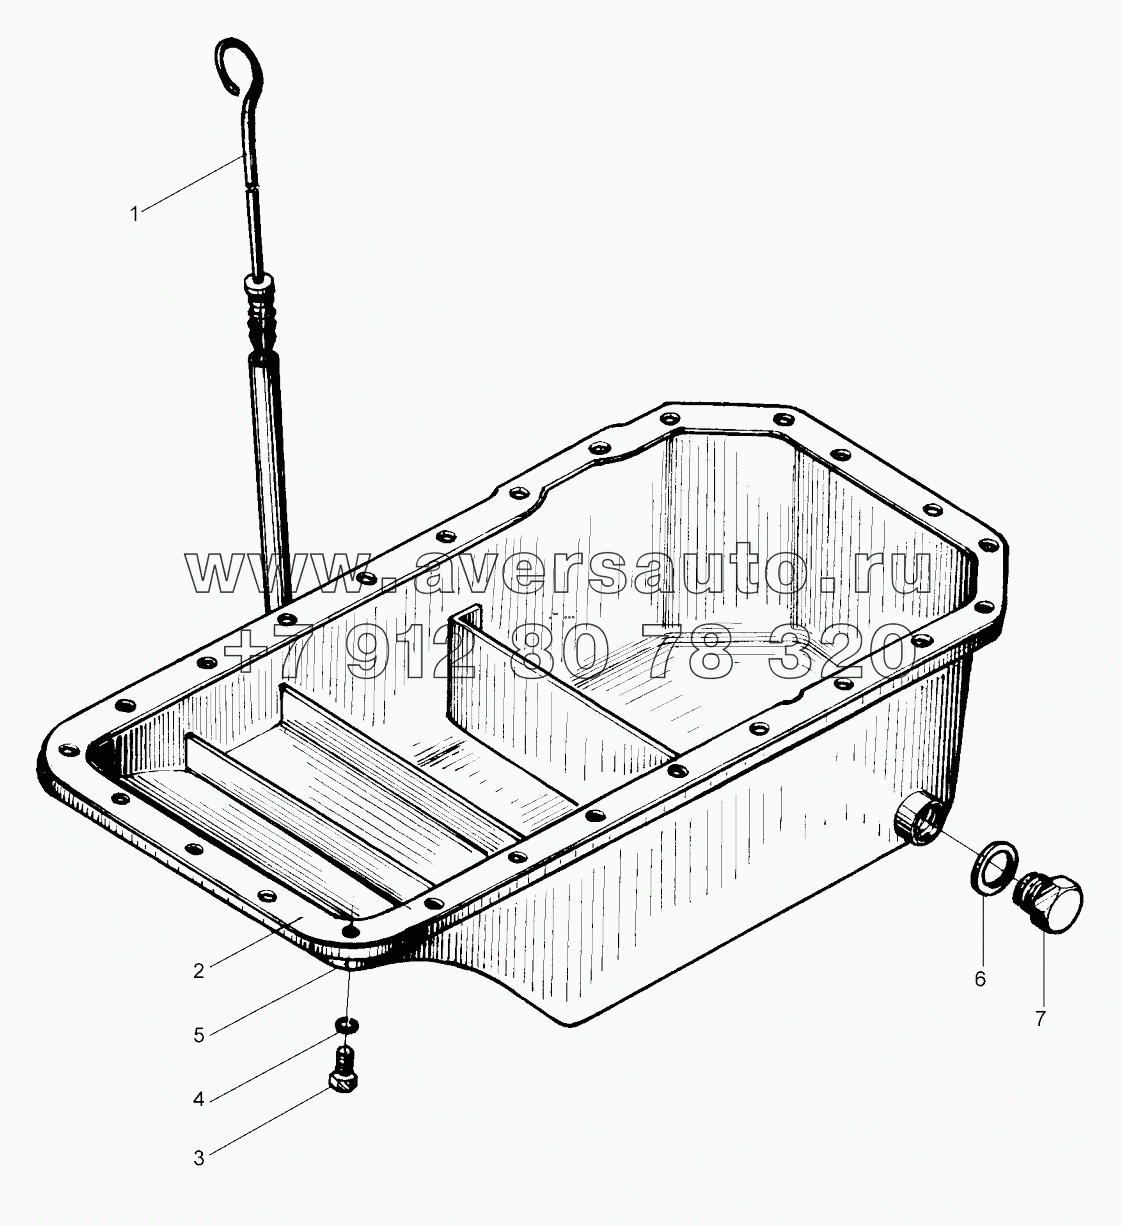  Oil sump assembly